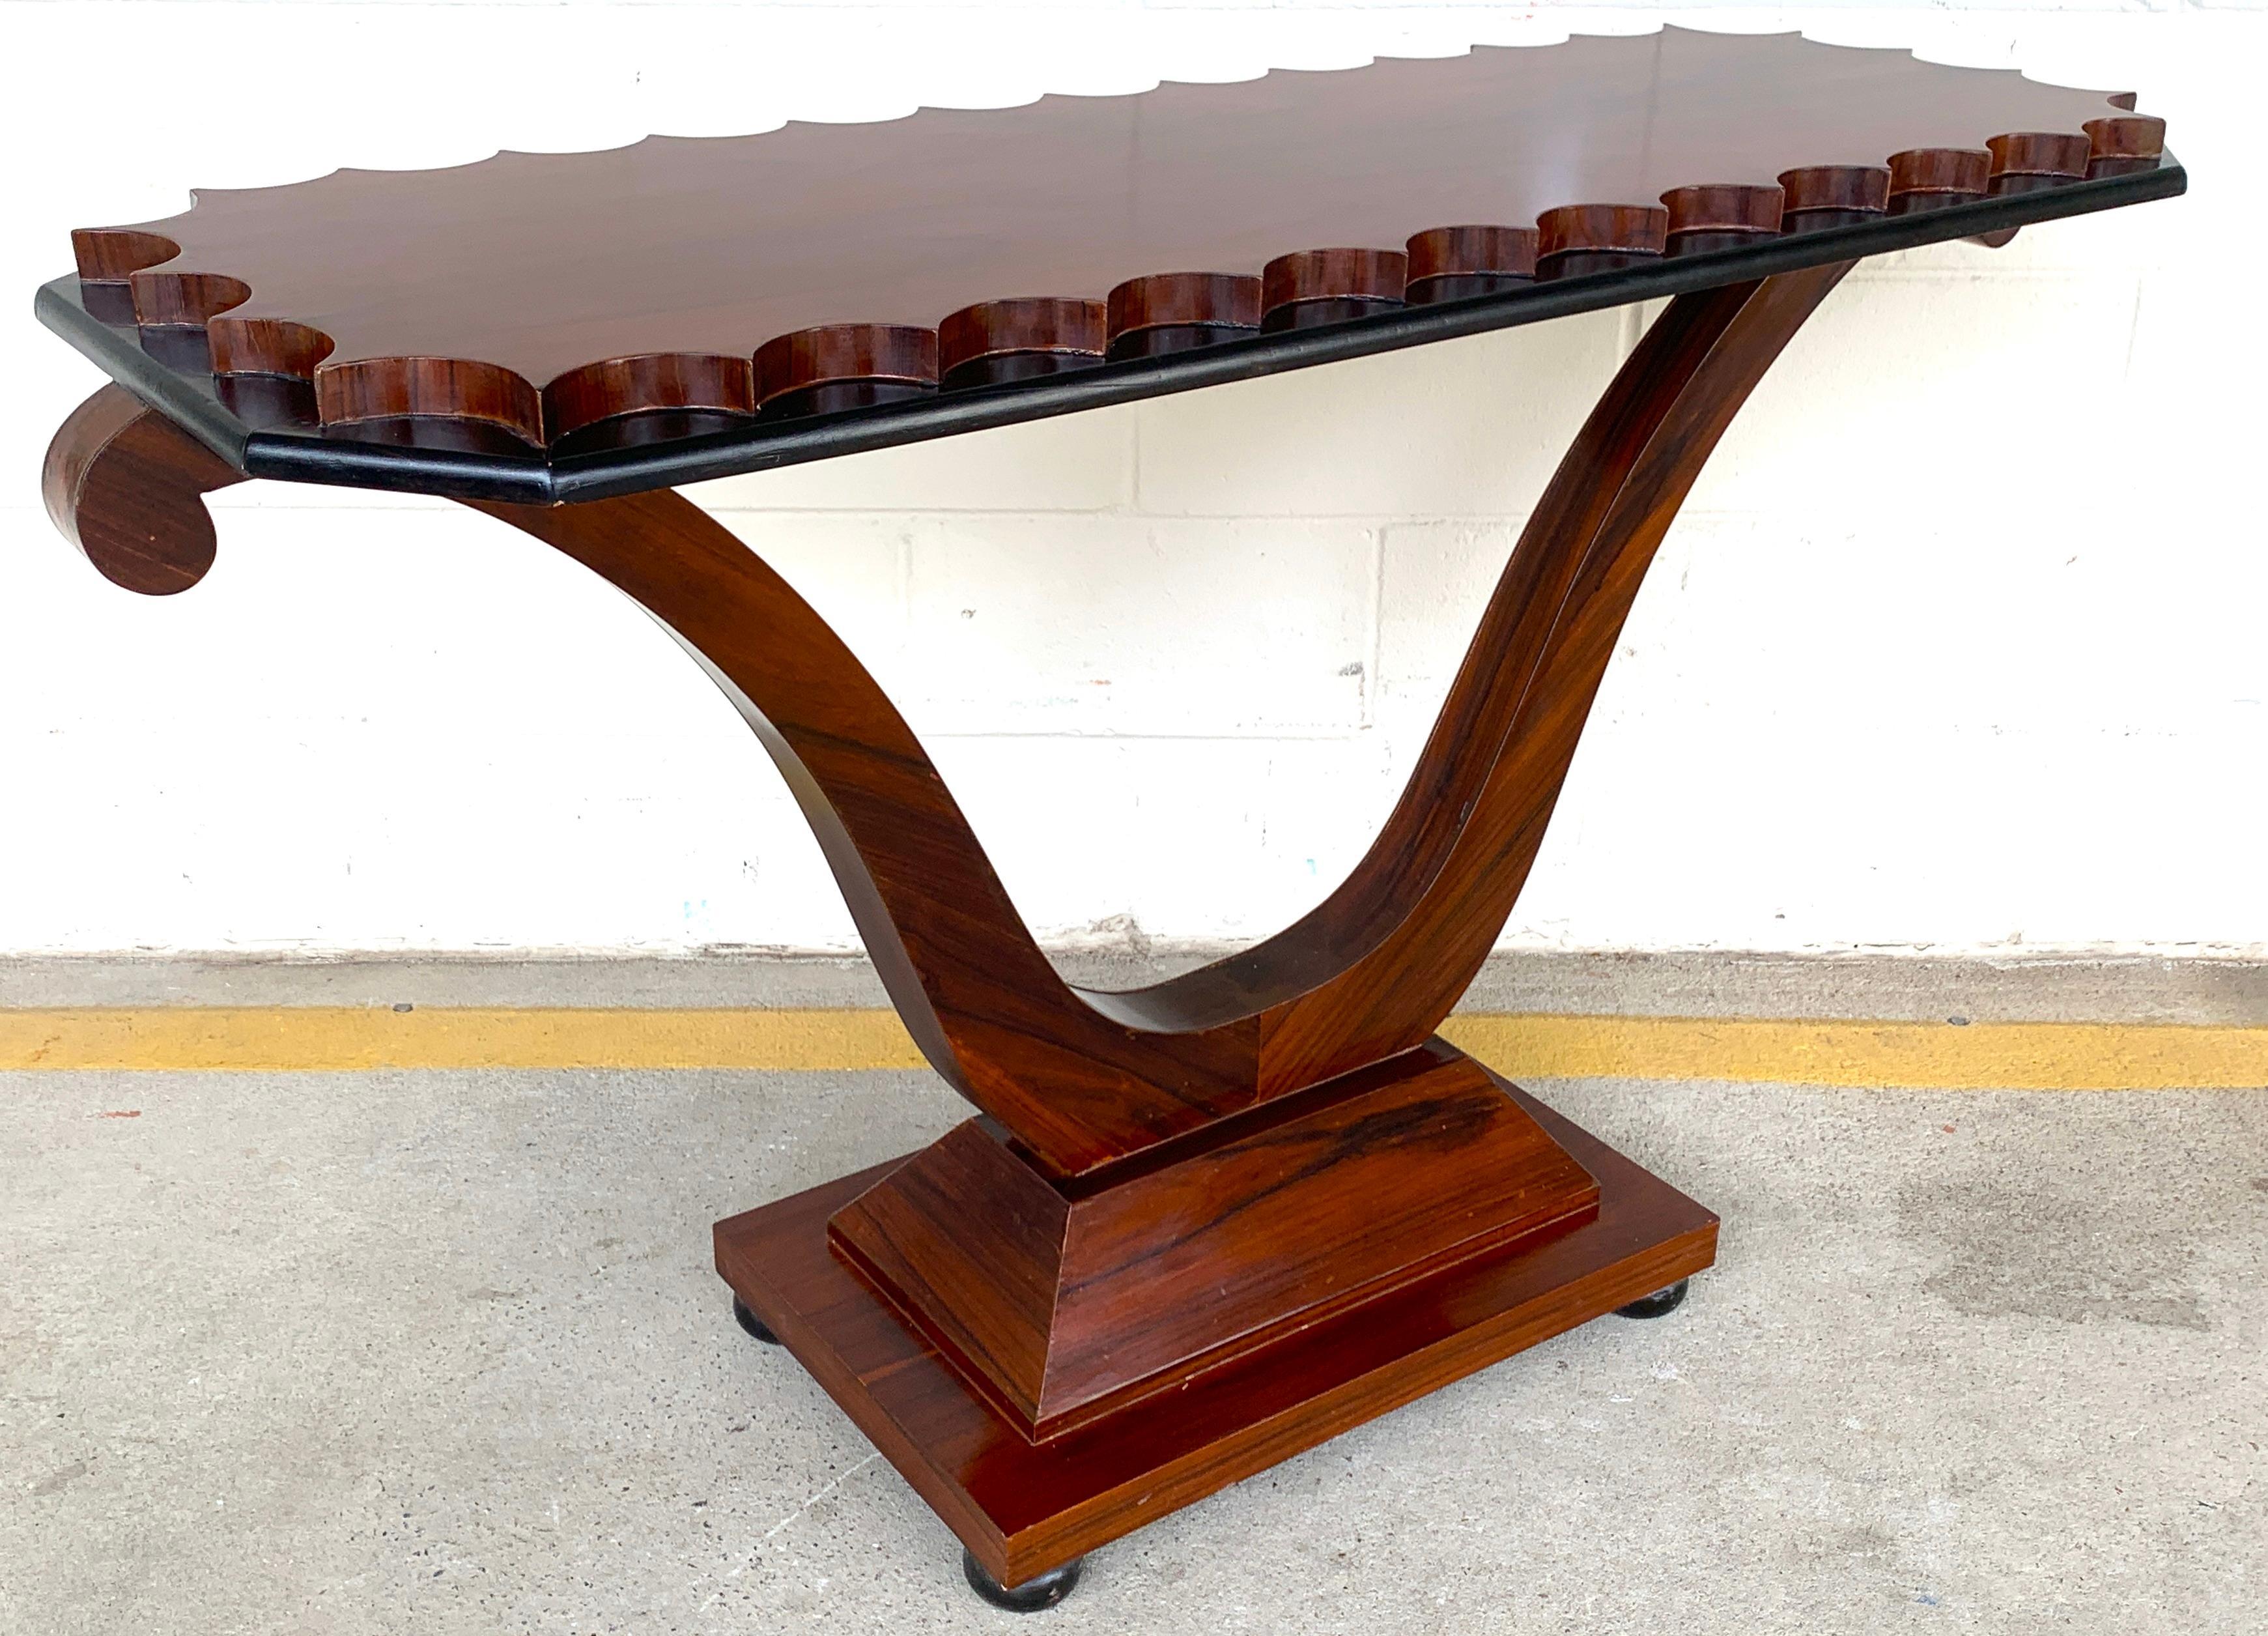 French Modern rosewood scalloped console table
With beautifully figured scalloped top, raised on lyre pedestal base
The console measures: 54